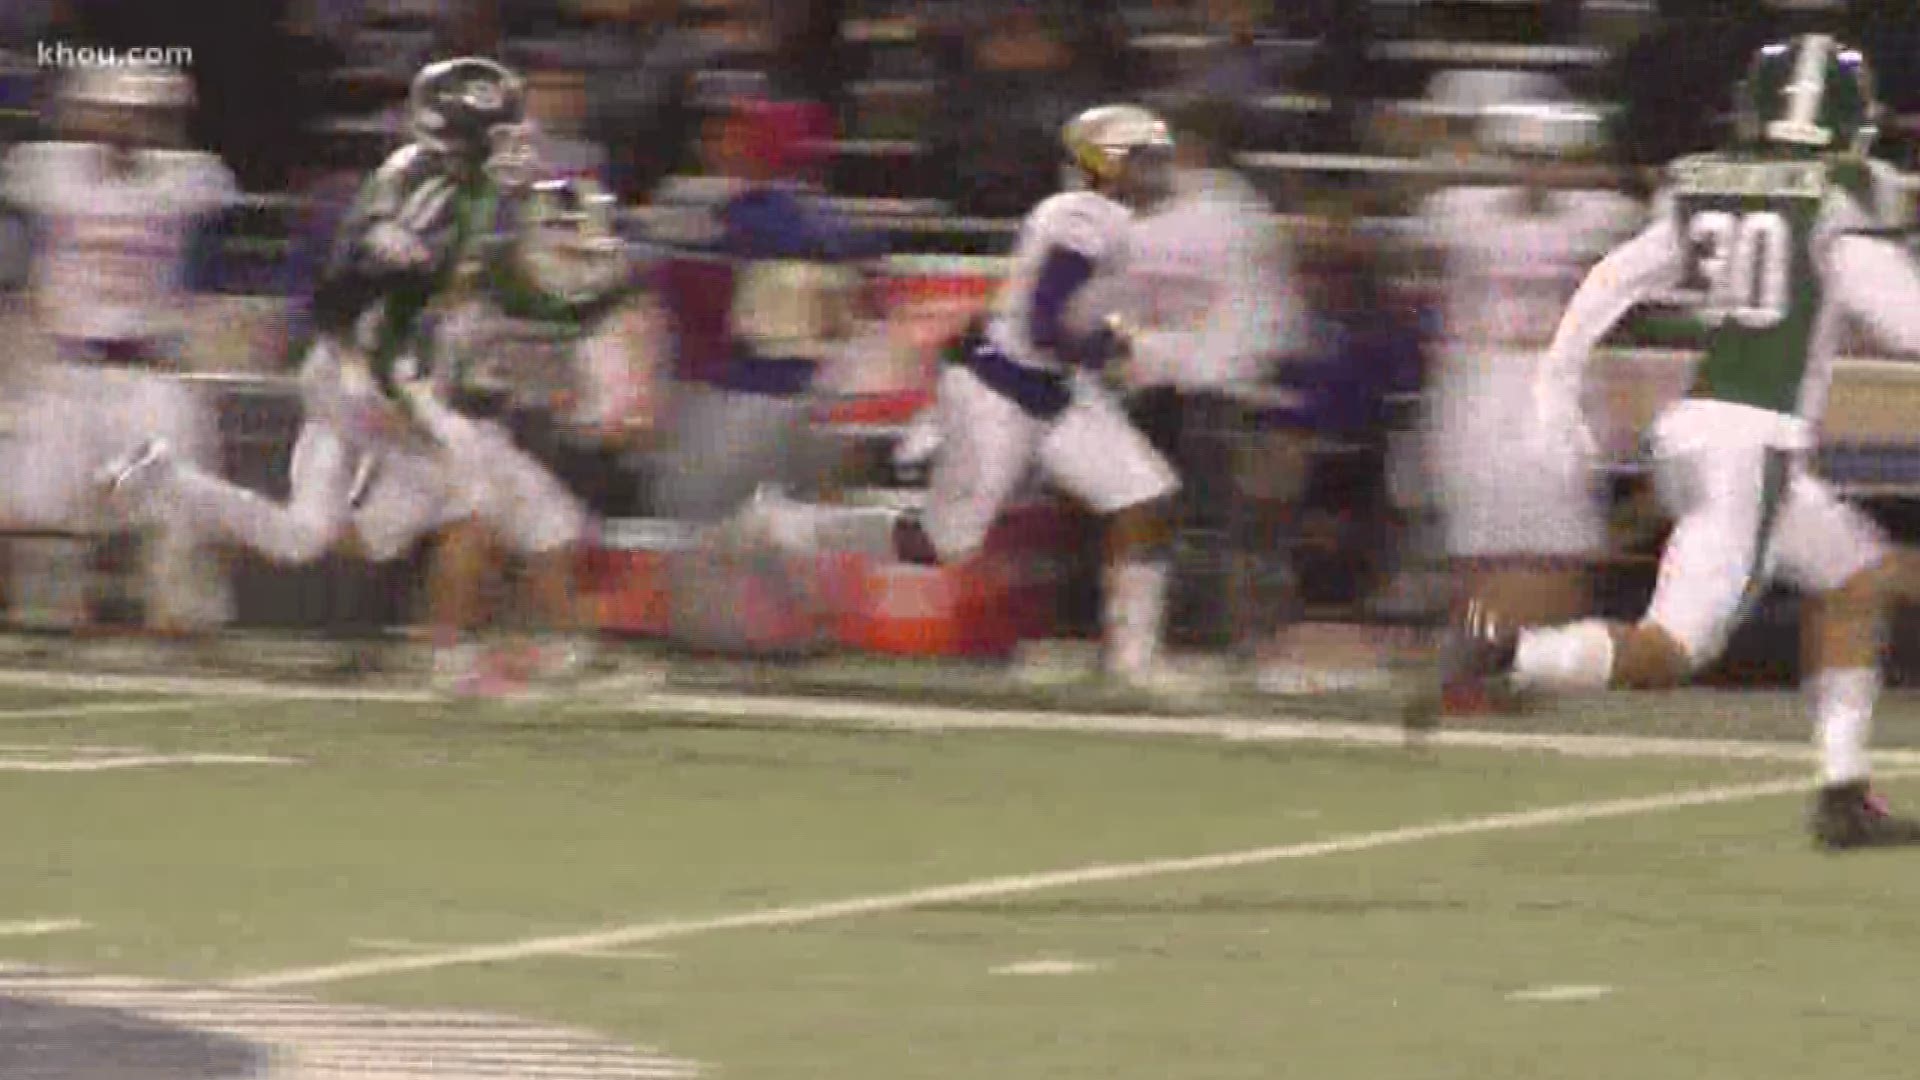 Jersey Village took on Stratford in our KHOU Game of the week. The Falcons took this one, 21-14.